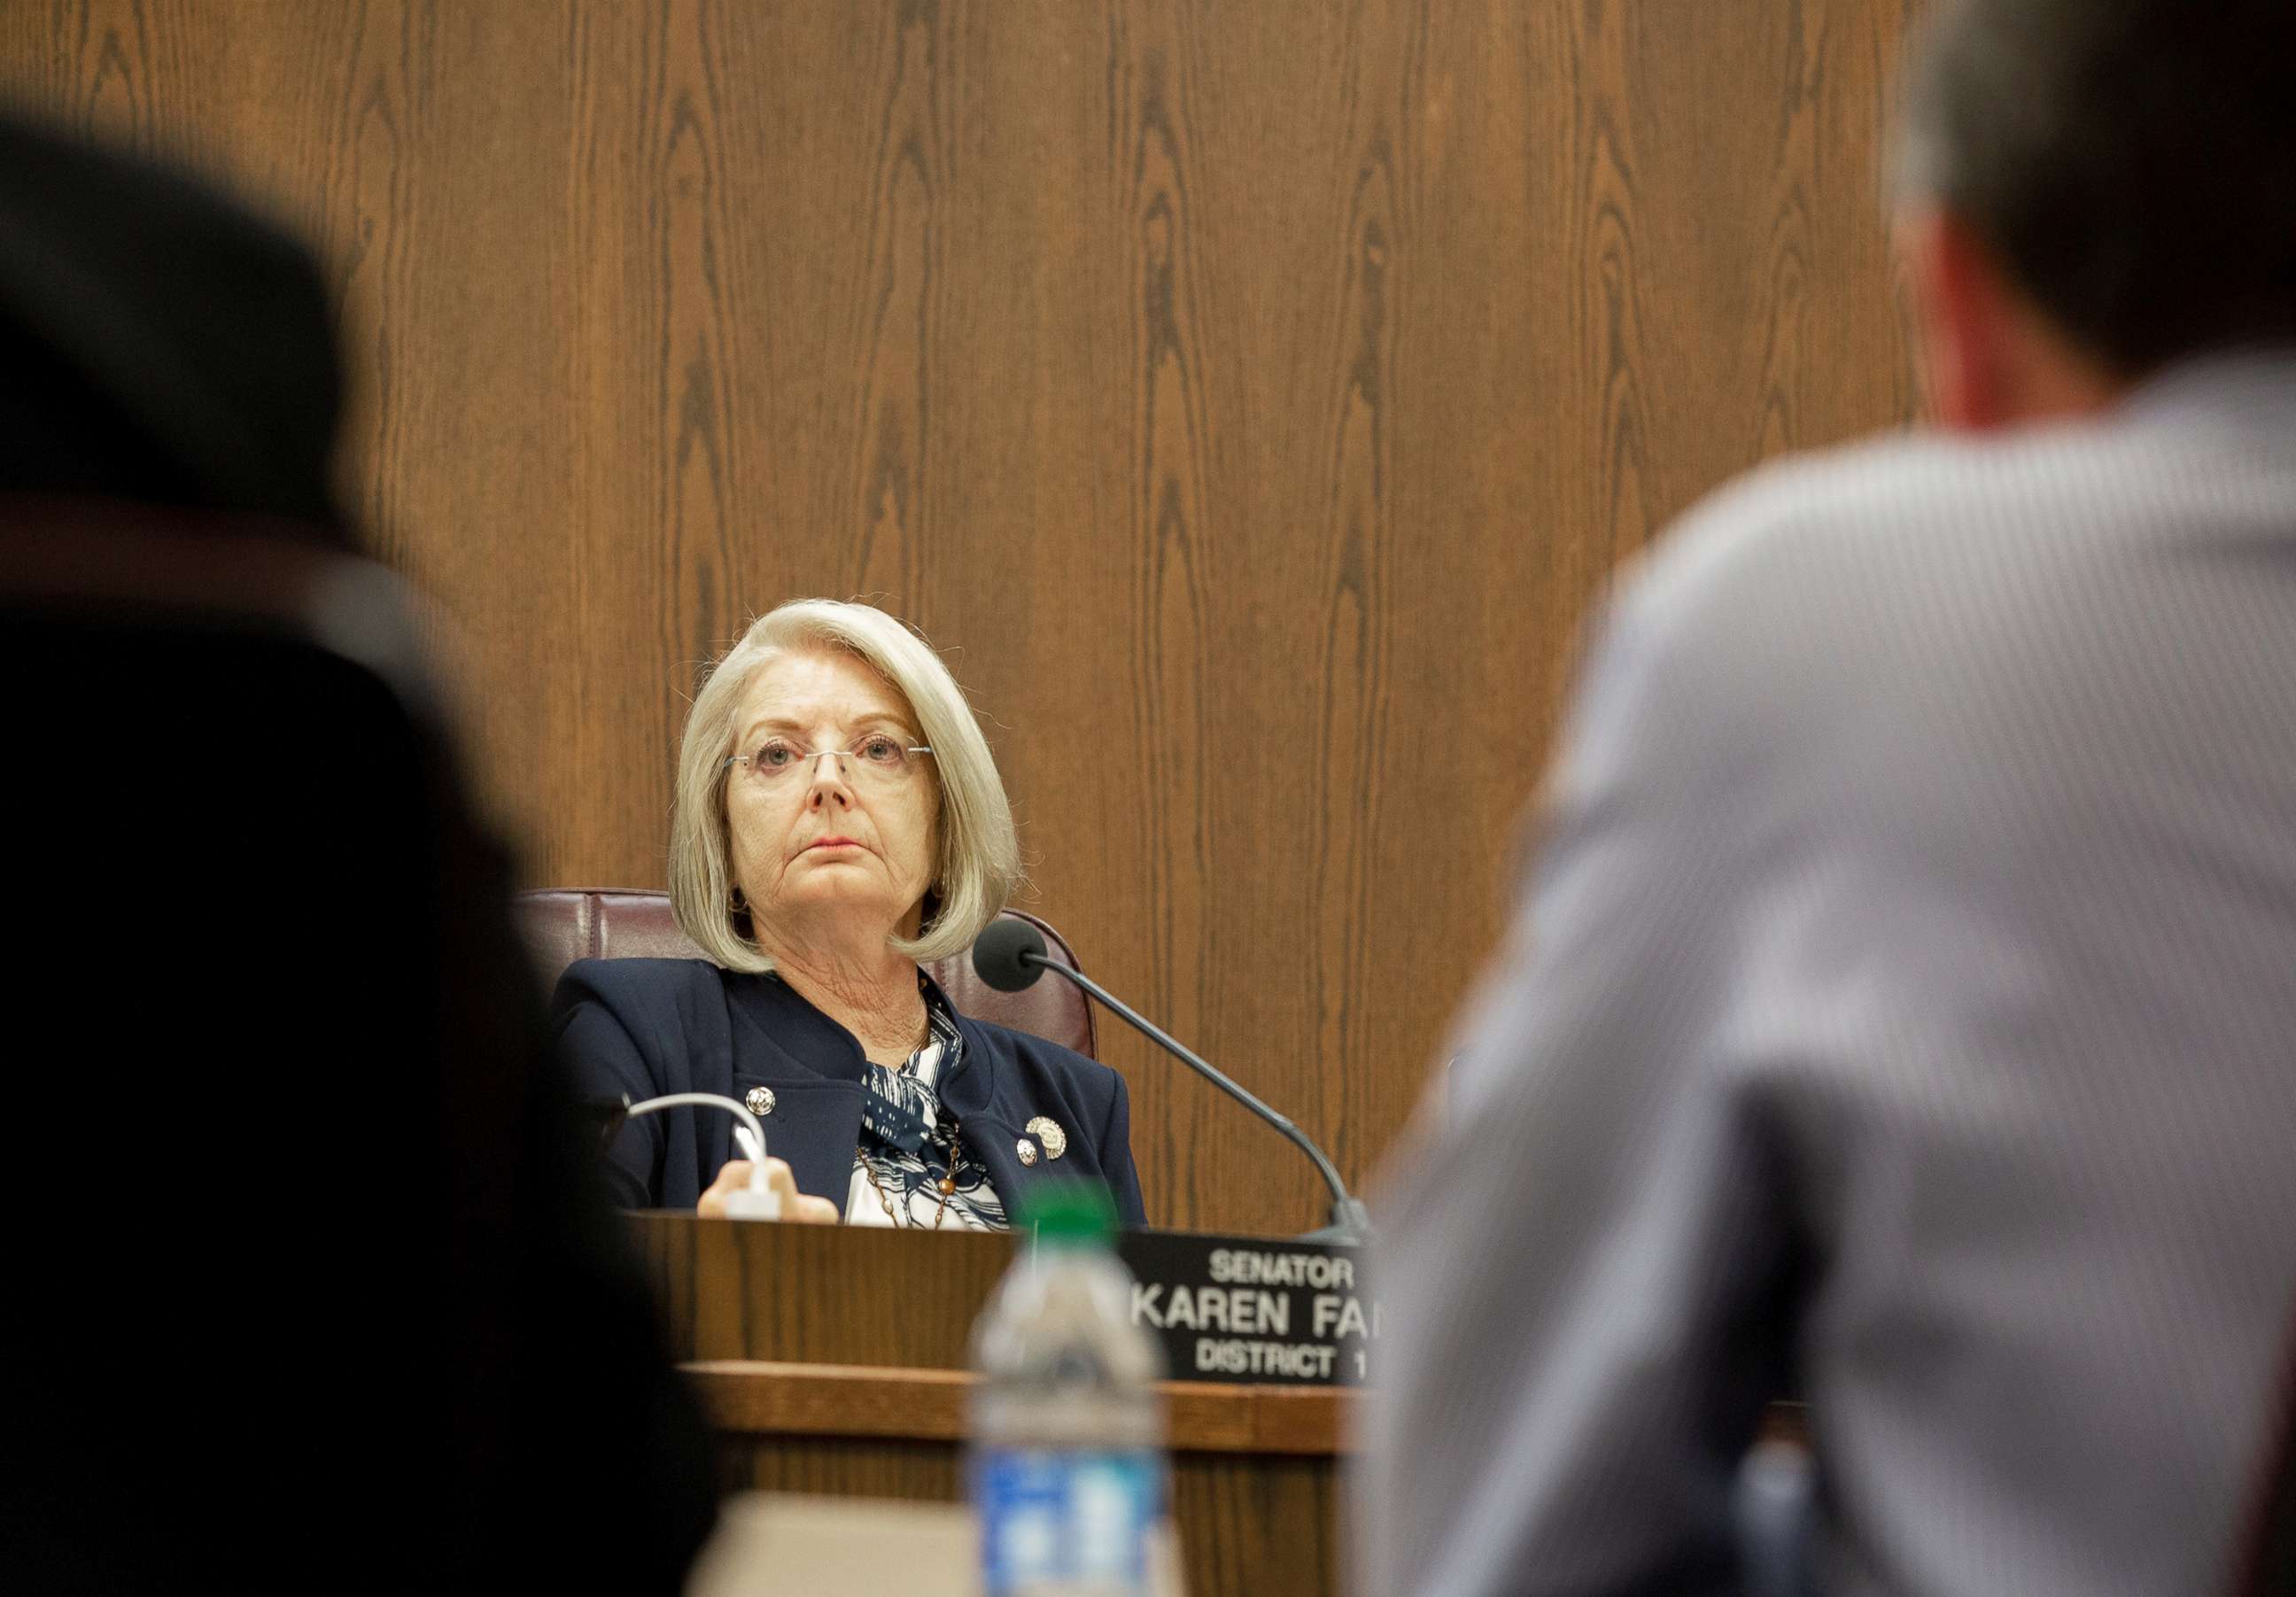 PHOTO: Senate President Karen Fann attends a meeting about the audit at the Arizona state Senate in Phoenix, July 15, 2021.